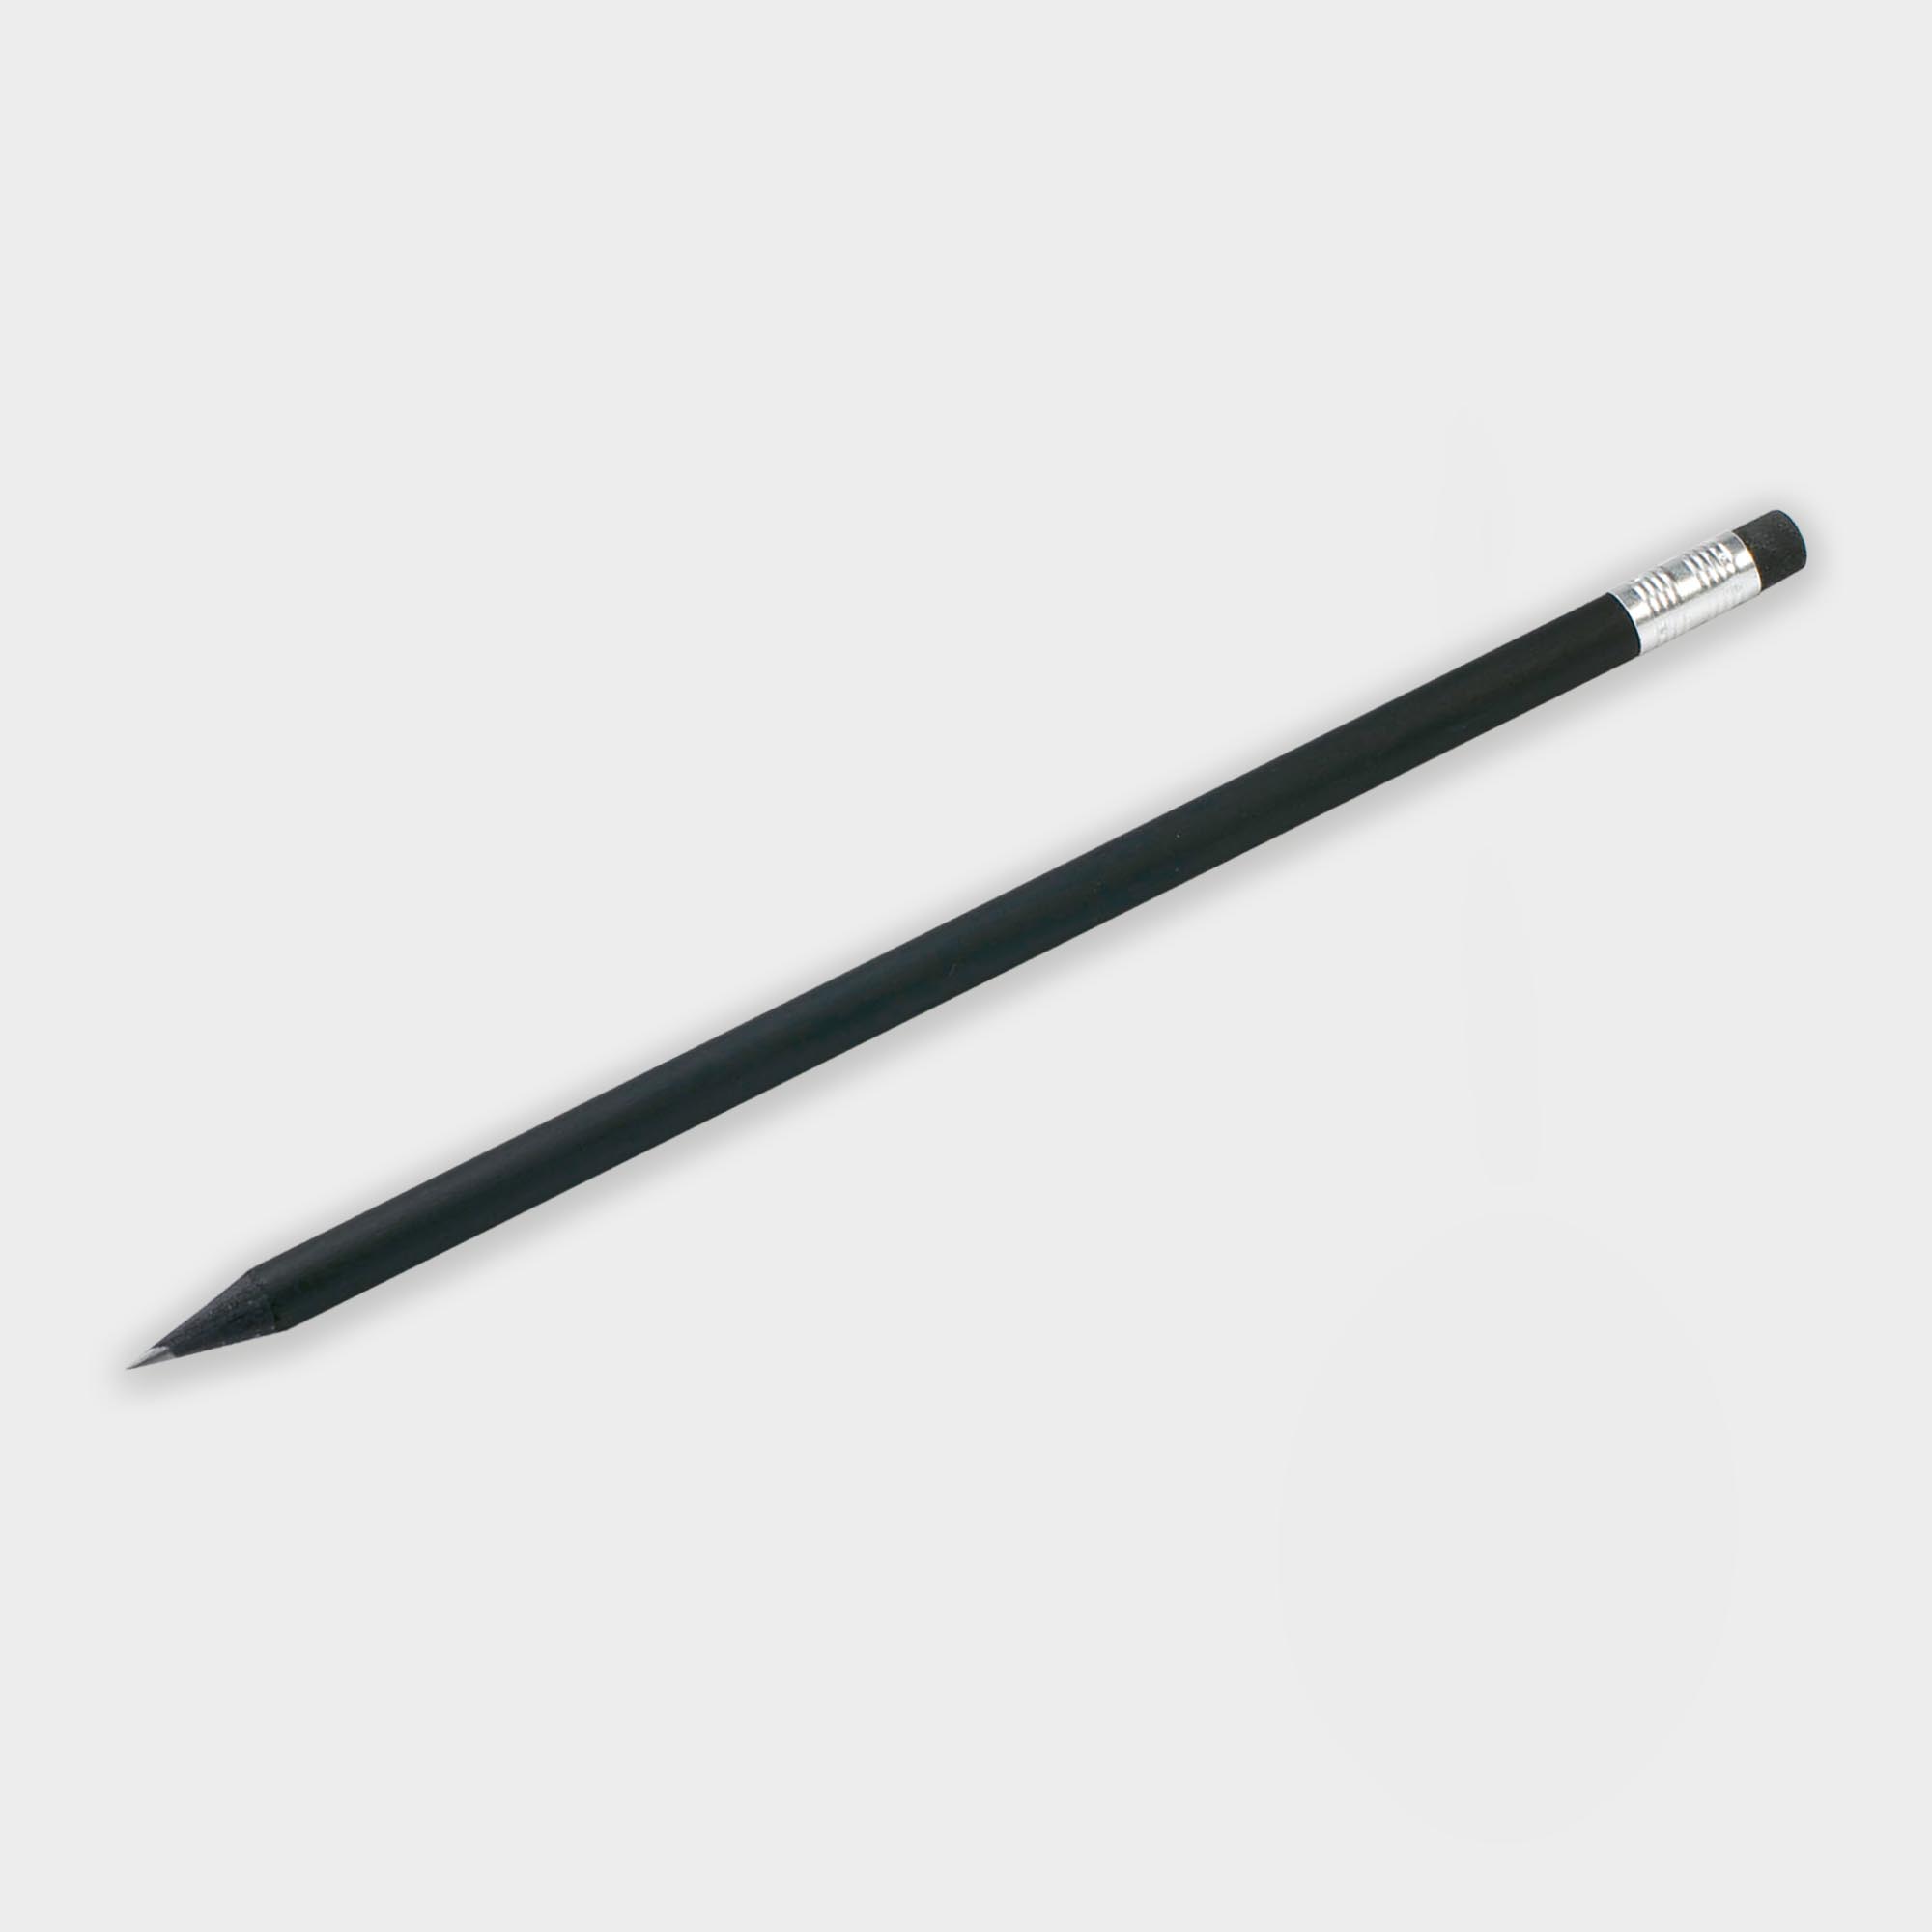 The Green & Good Black Pencil made from sustainable timber.  Wooden eco-pencil with eraser in a high quality matt black finish with HB lead. Comes with silver ferrule with black eraser.